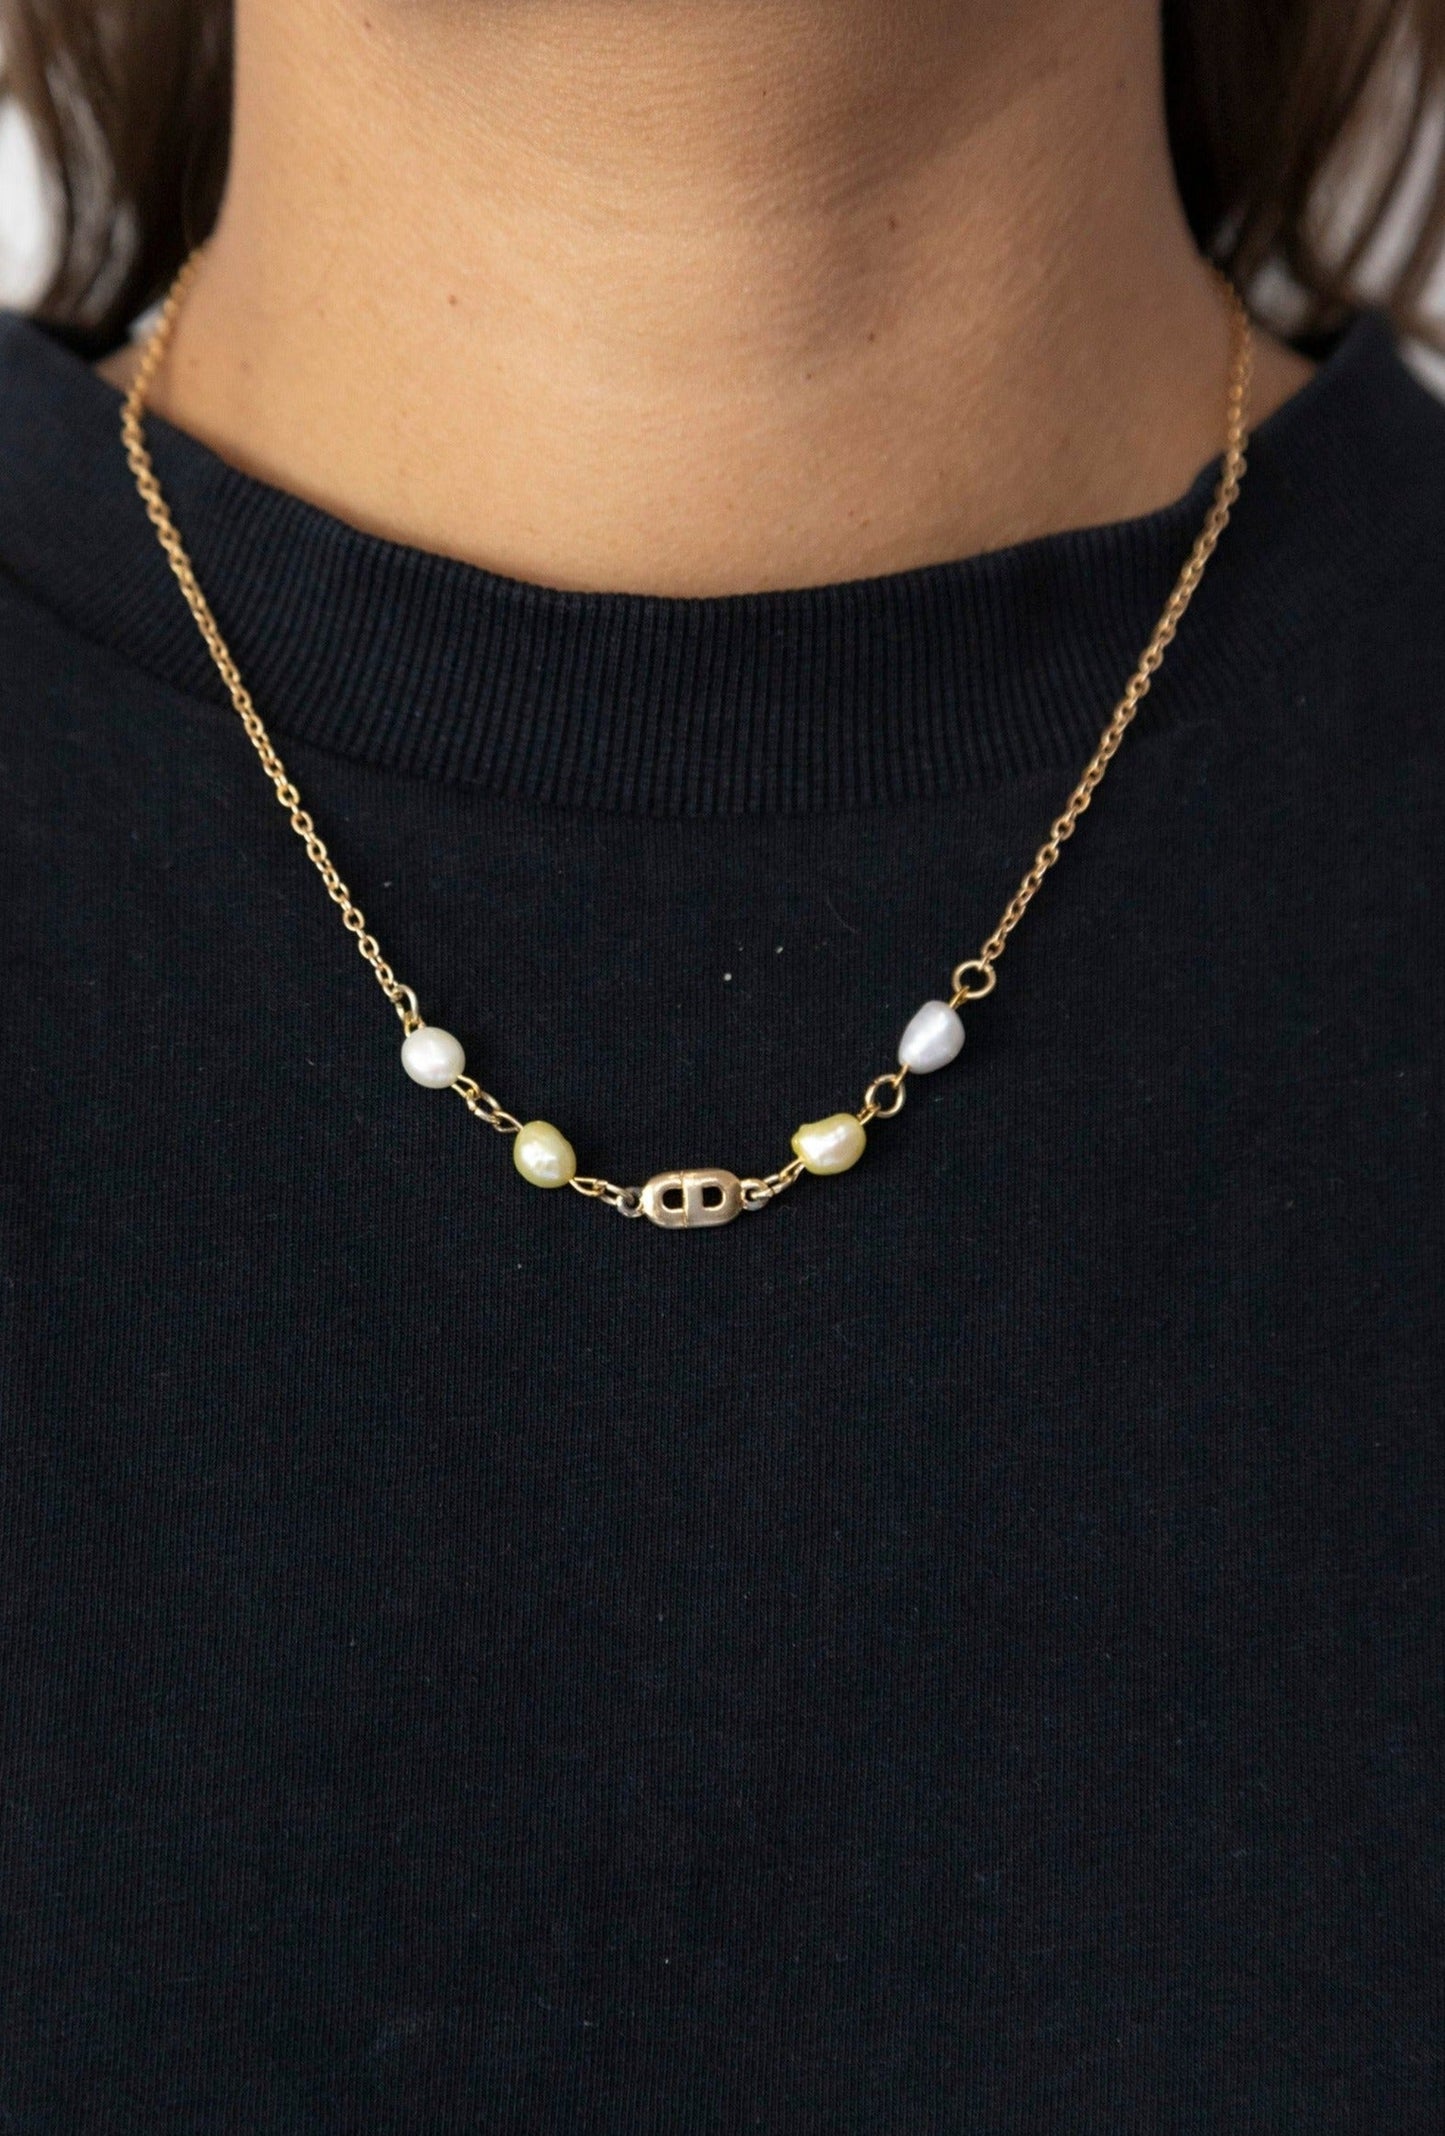 VT Rework: Christian Dior CD Logo Link Yellow Pearl Chain Necklace